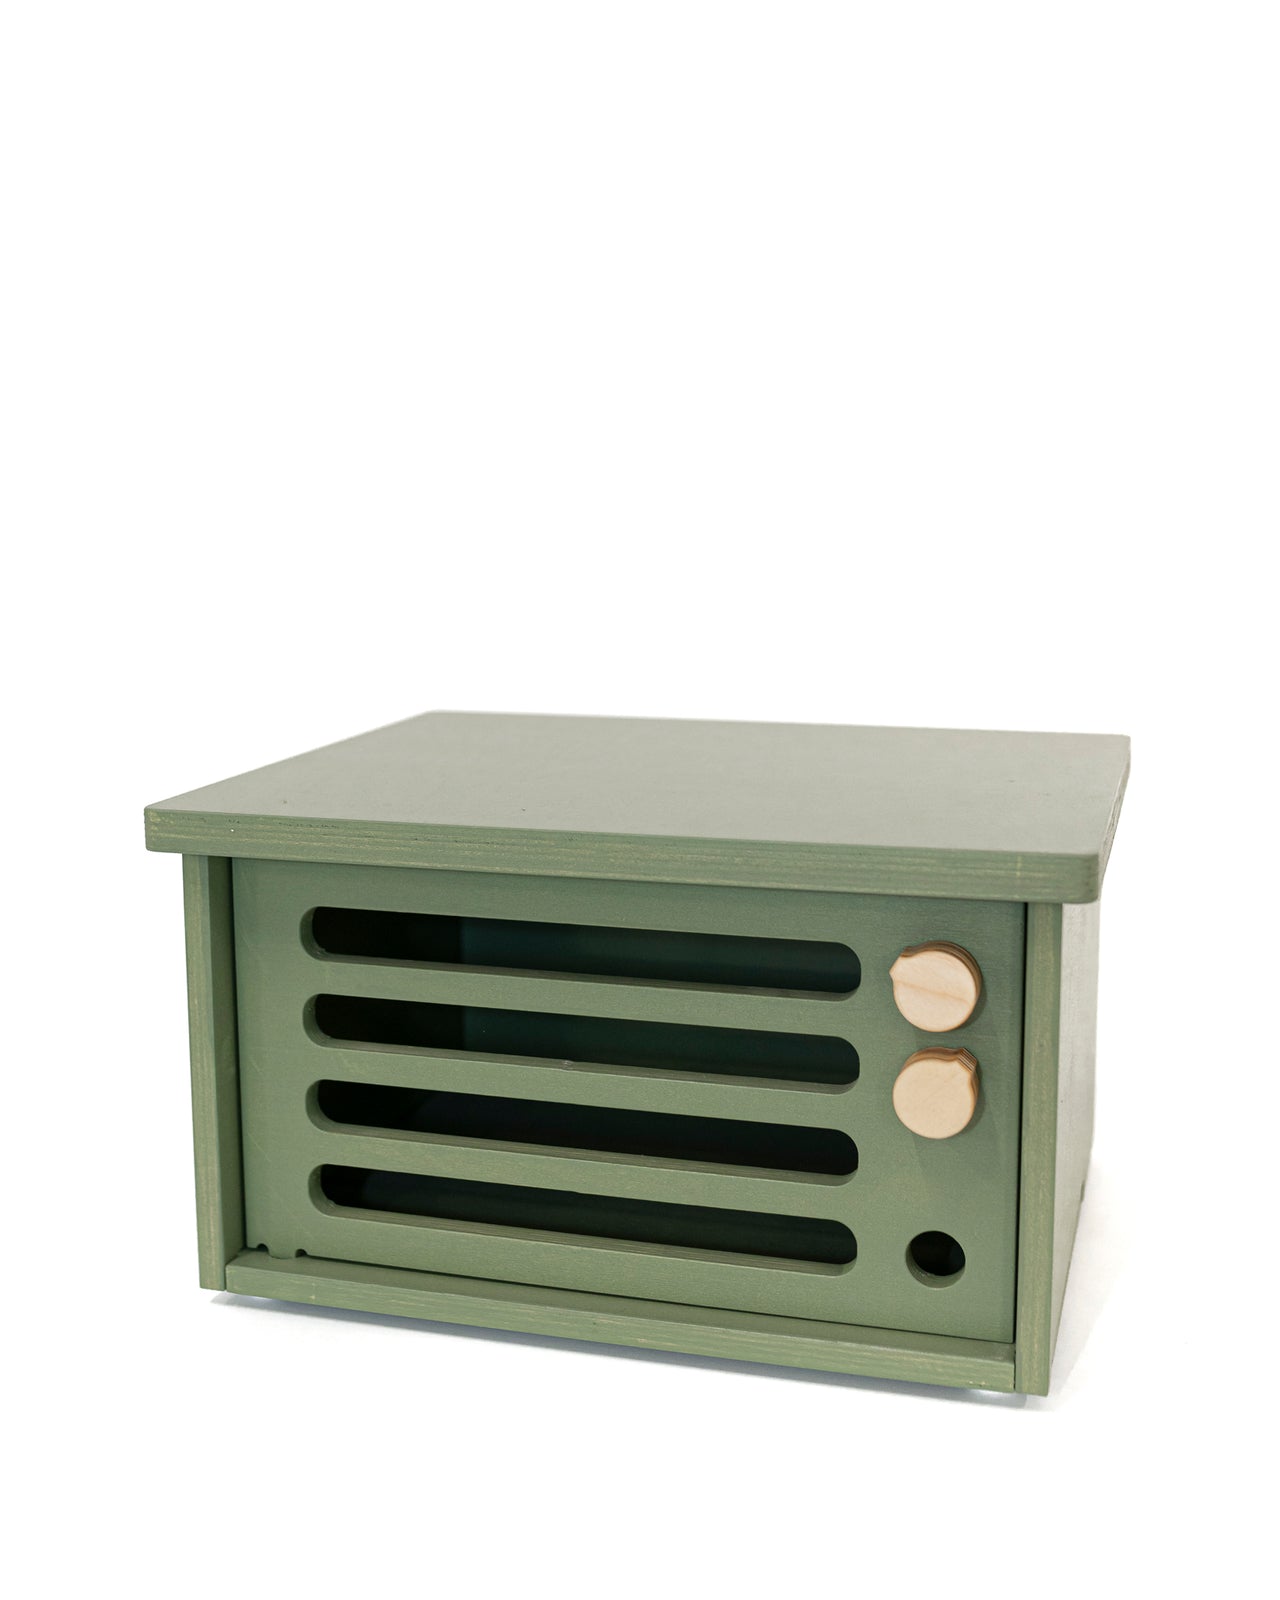 Play Oven - Dusty Green - MIDMINI - Handcrafted wooden toys for generations.